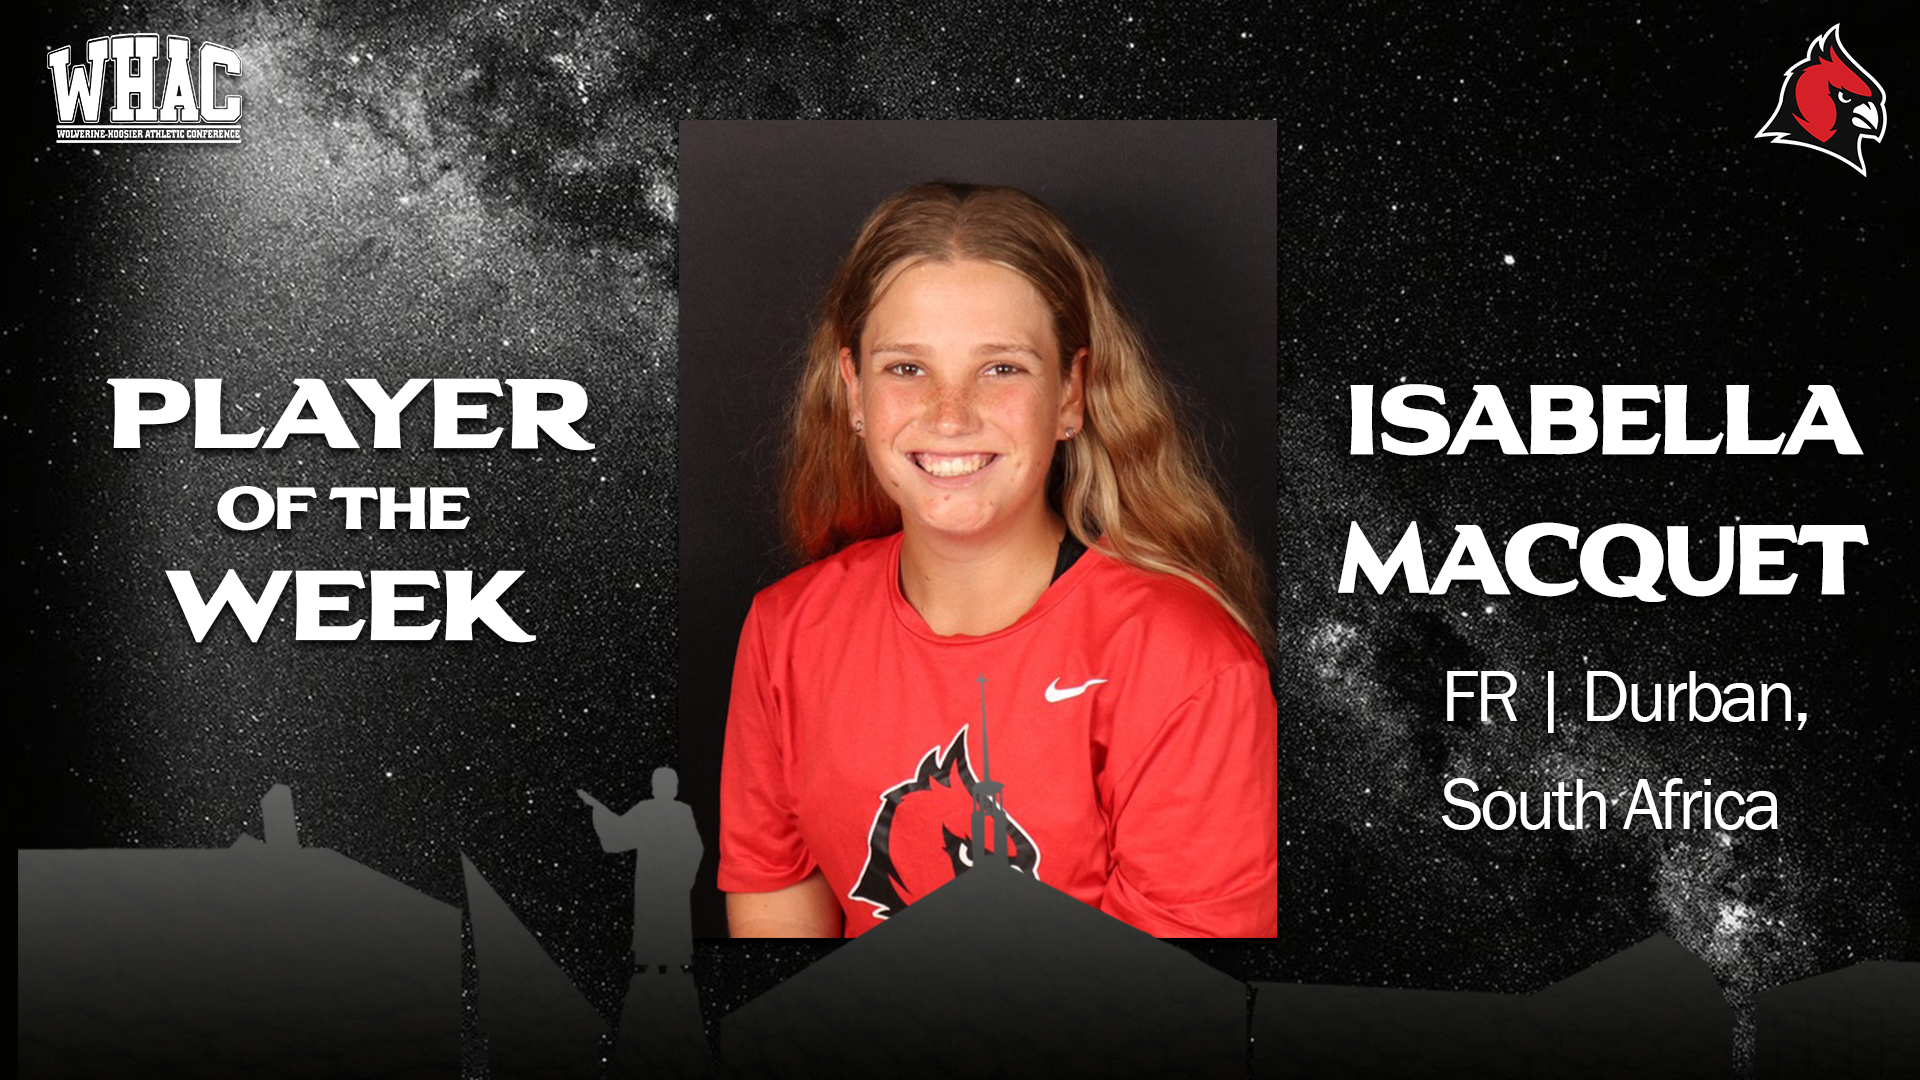 Women's Tennis' Isabella Macquet takes home WHAC Player of the Week honors